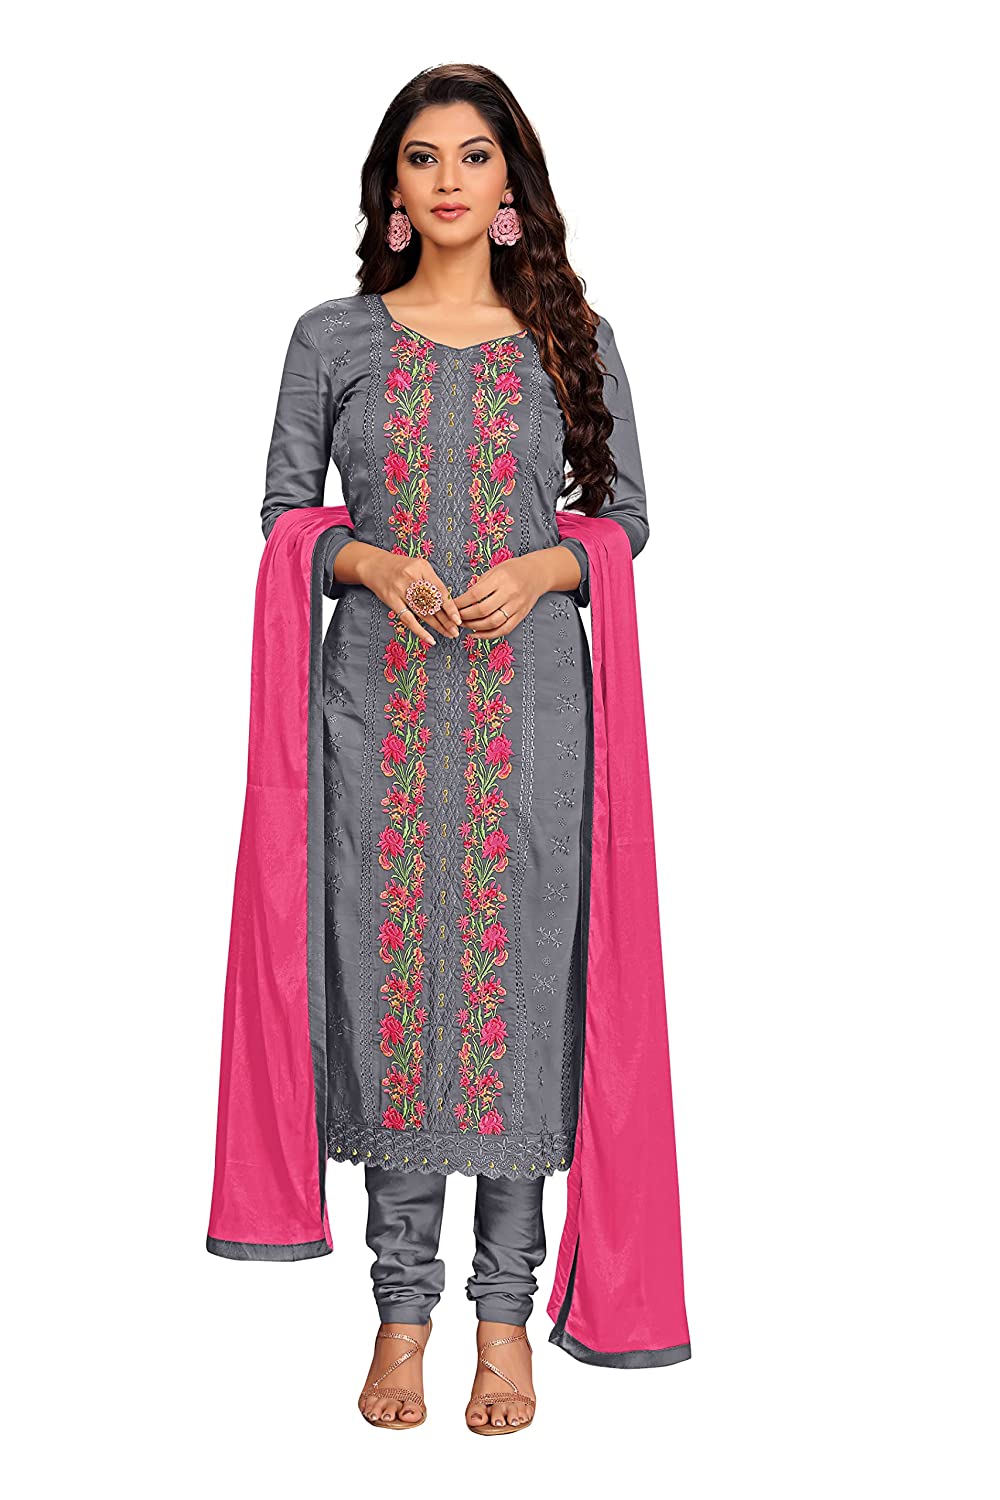 Fashion Women's Cotton Embroidery Dress Material Unstitched